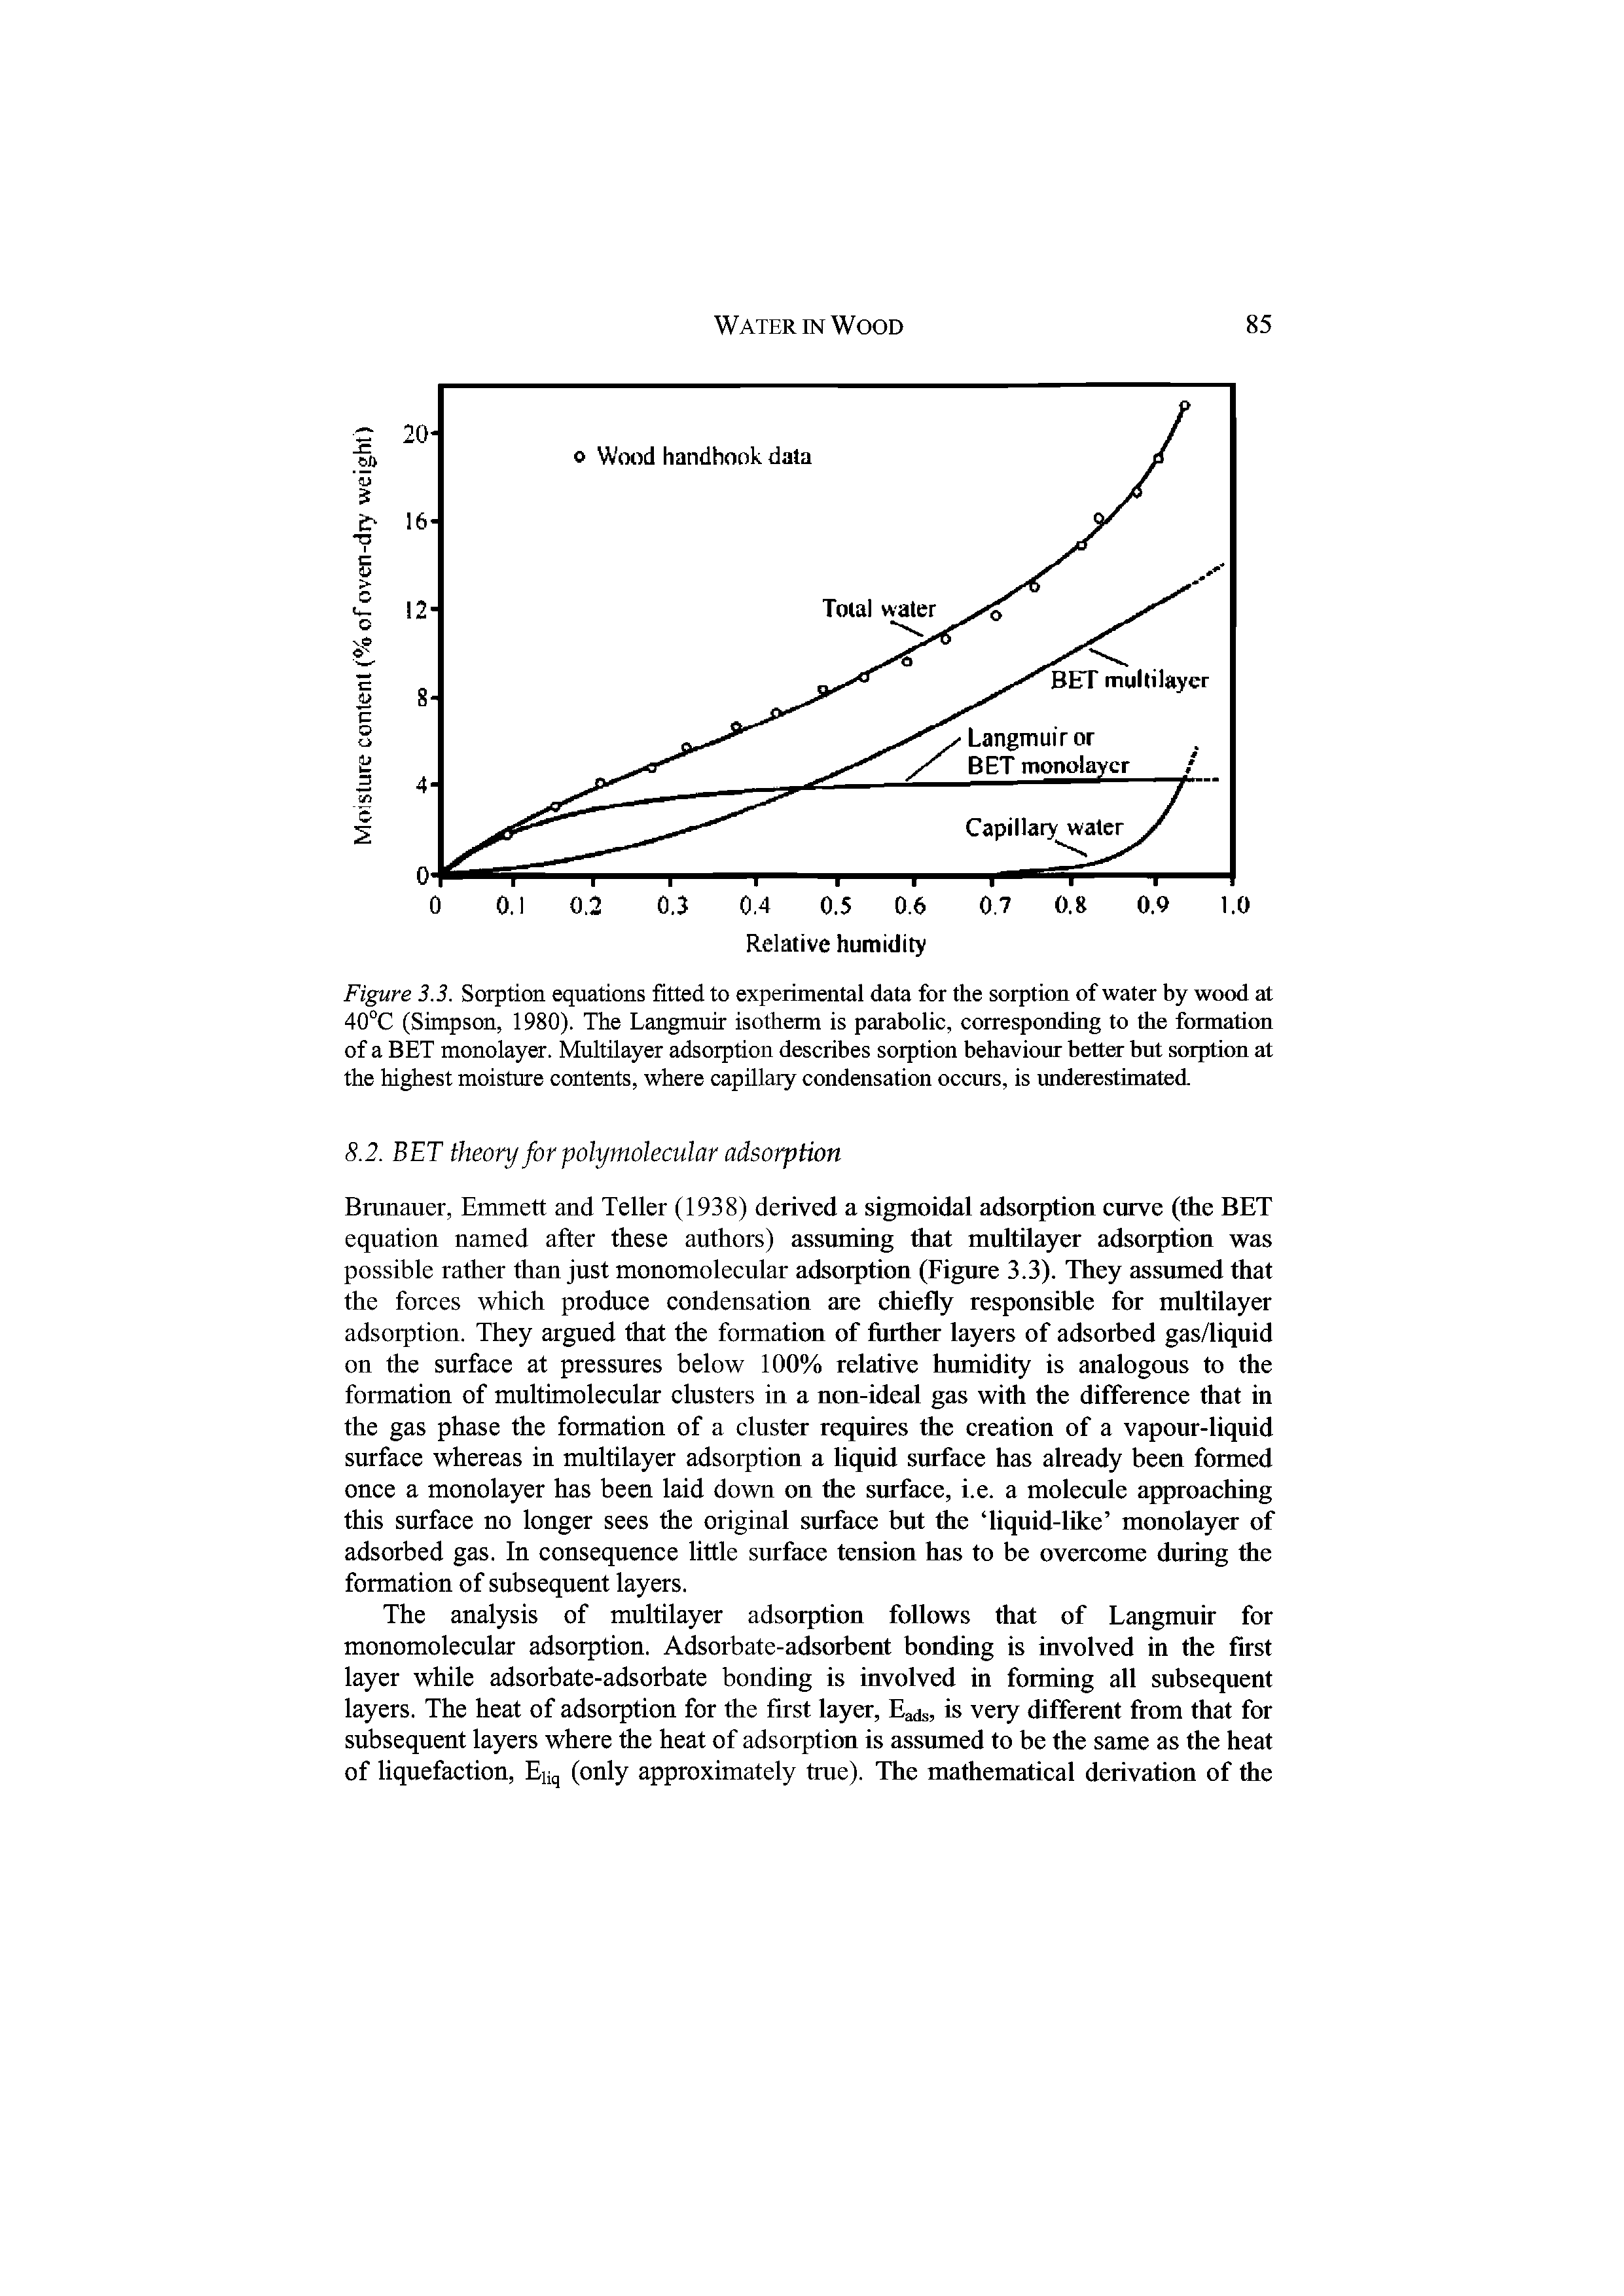 Figure 3.3. Sorption equations fitted to experimental data for the sorption of water by wood at 40°C (Simpson, 1980). The Langmuir isotherm is parabolic, corresponding to the formation of a BET monolayer. Multilayer adsorption describes sorption behaviour better but sorption at the highest moisture contents, where capillary condensation occurs, is underestimated.